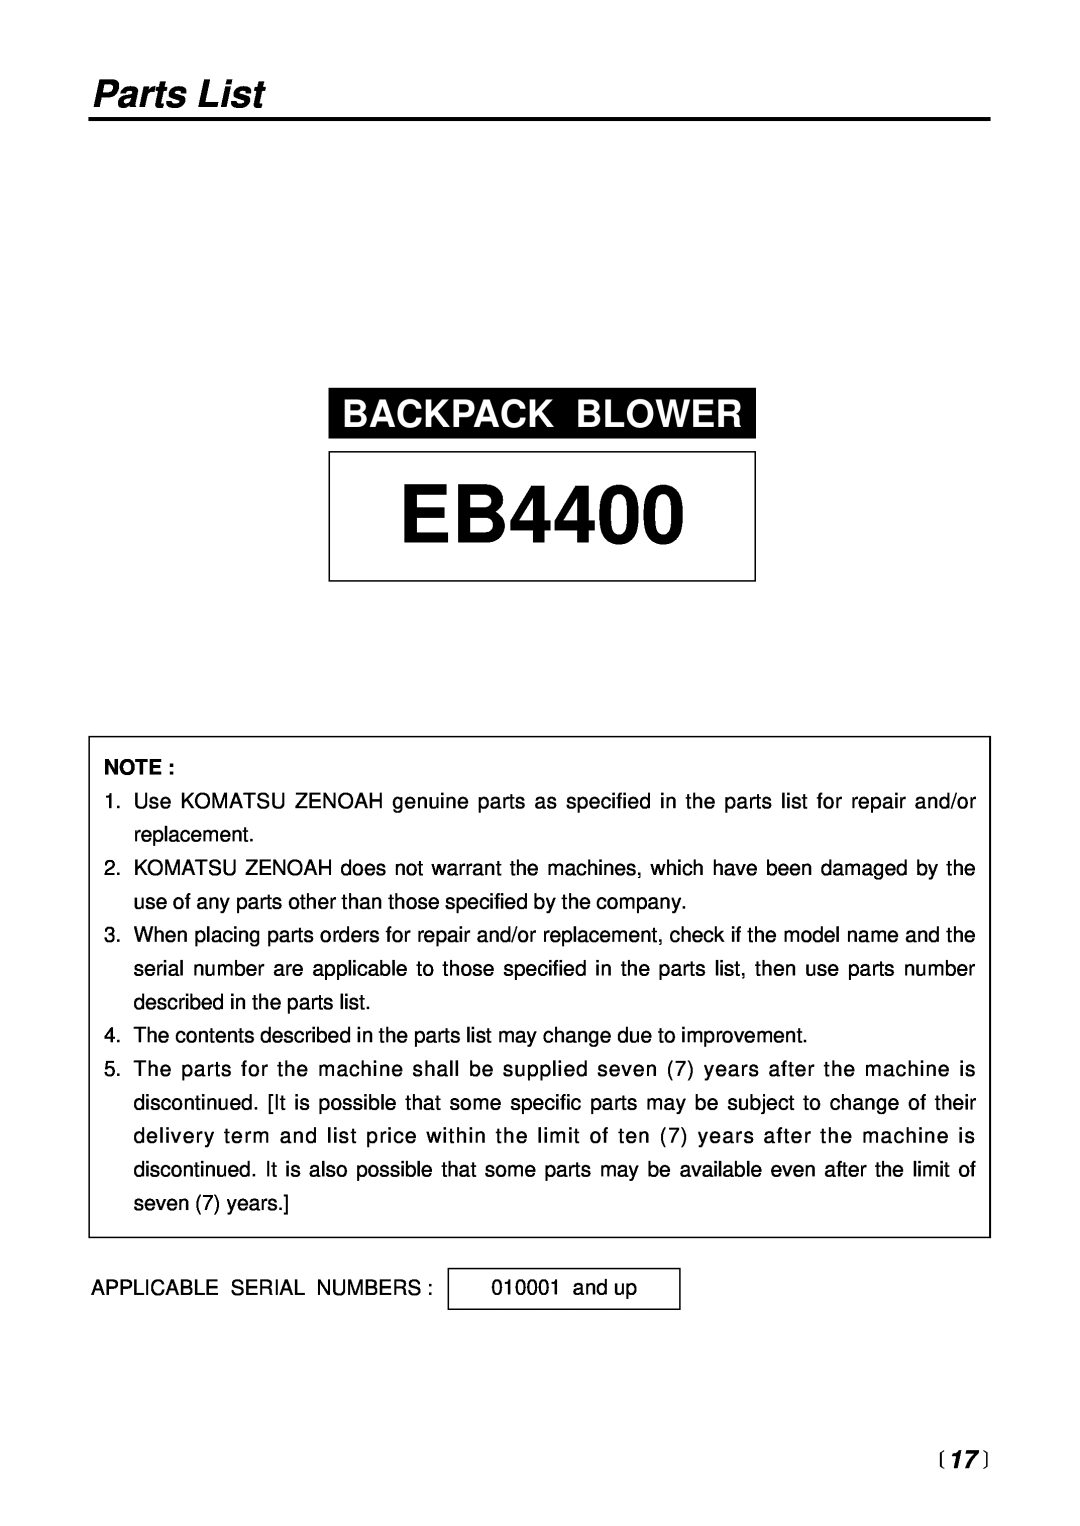 RedMax EB4400 manual Parts List, Backpack Blower,  17  